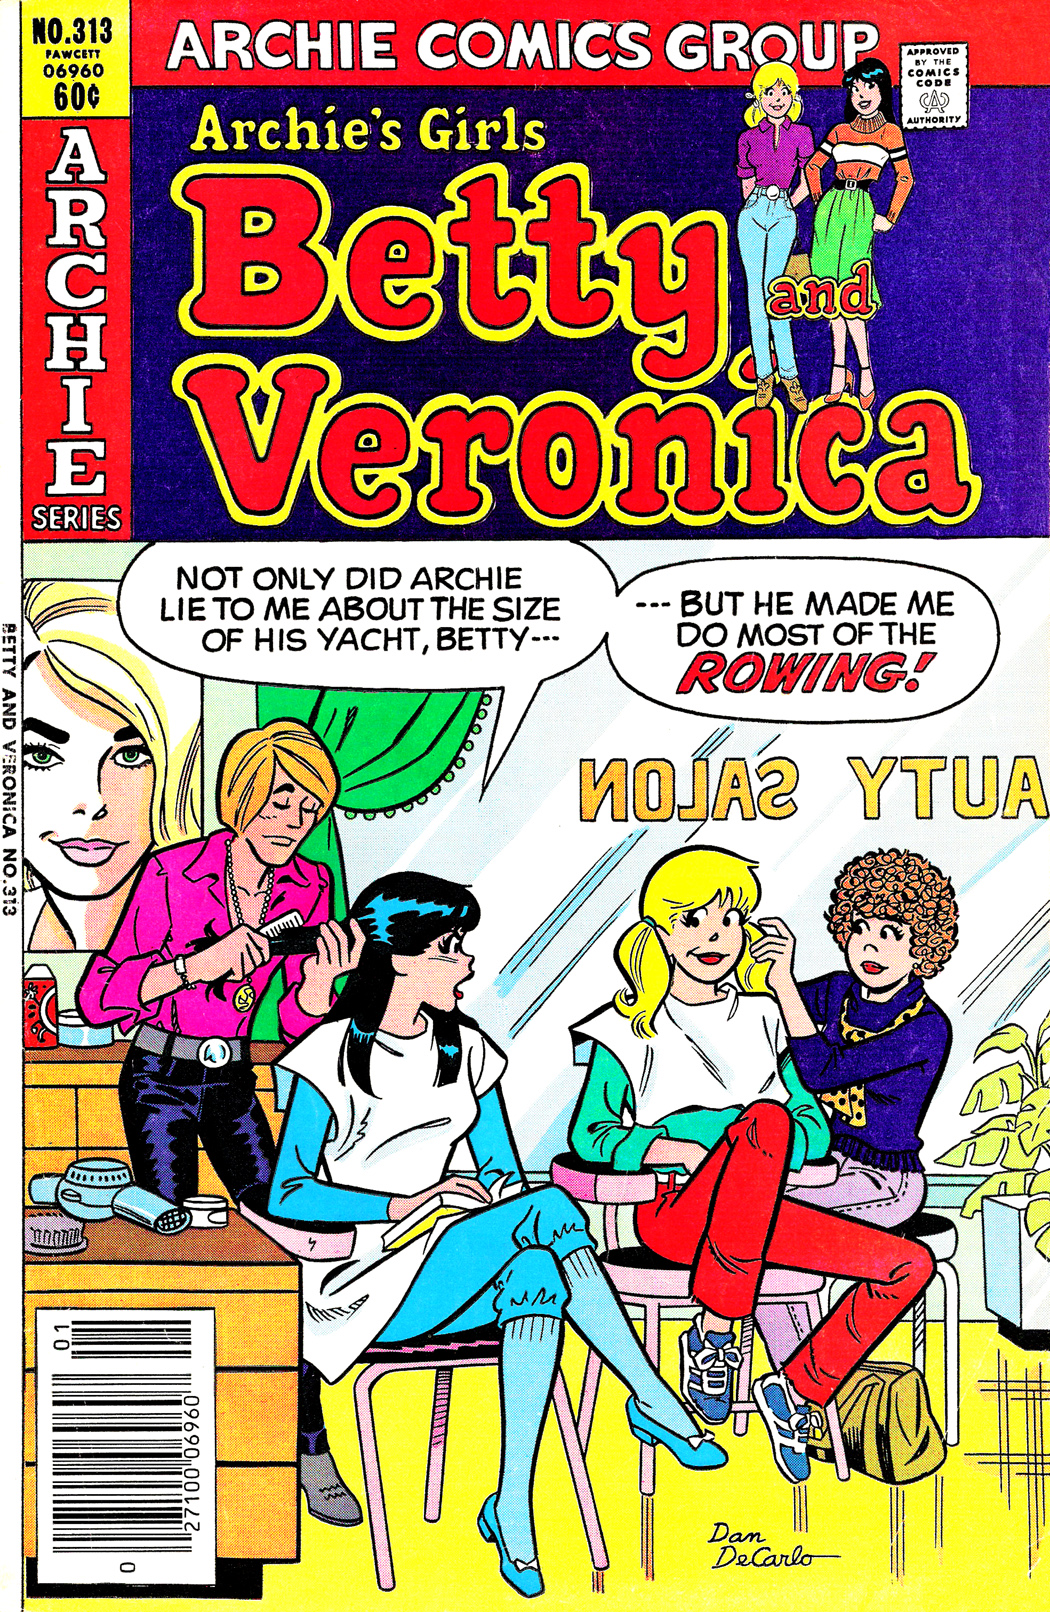 Read online Archie's Girls Betty and Veronica comic -  Issue #313 - 1